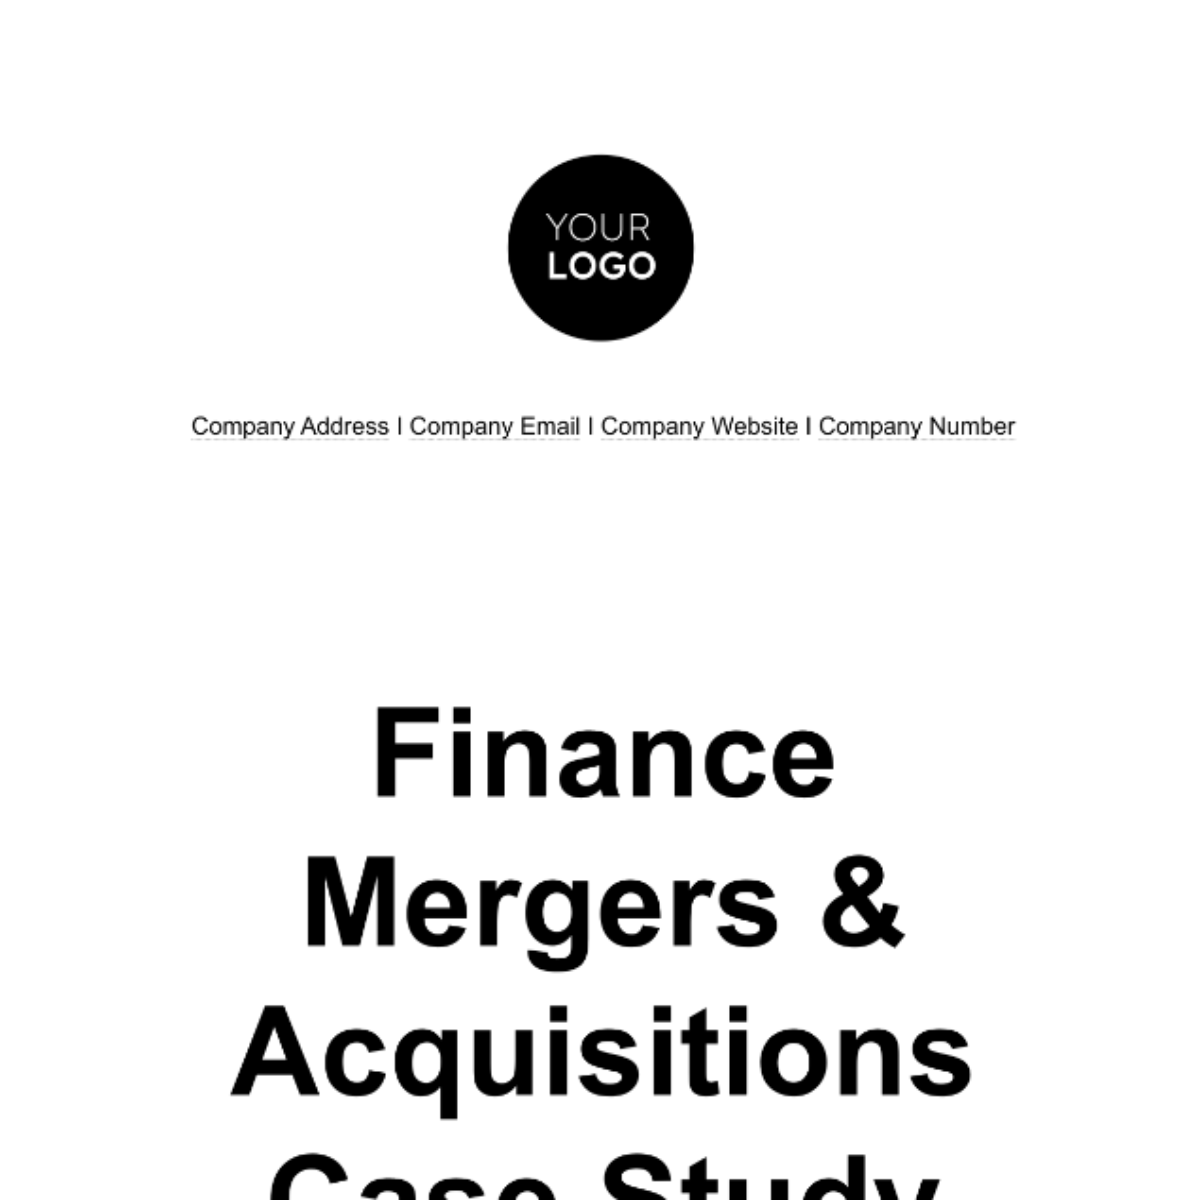 Free Finance Mergers & Acquisitions Case Study Template